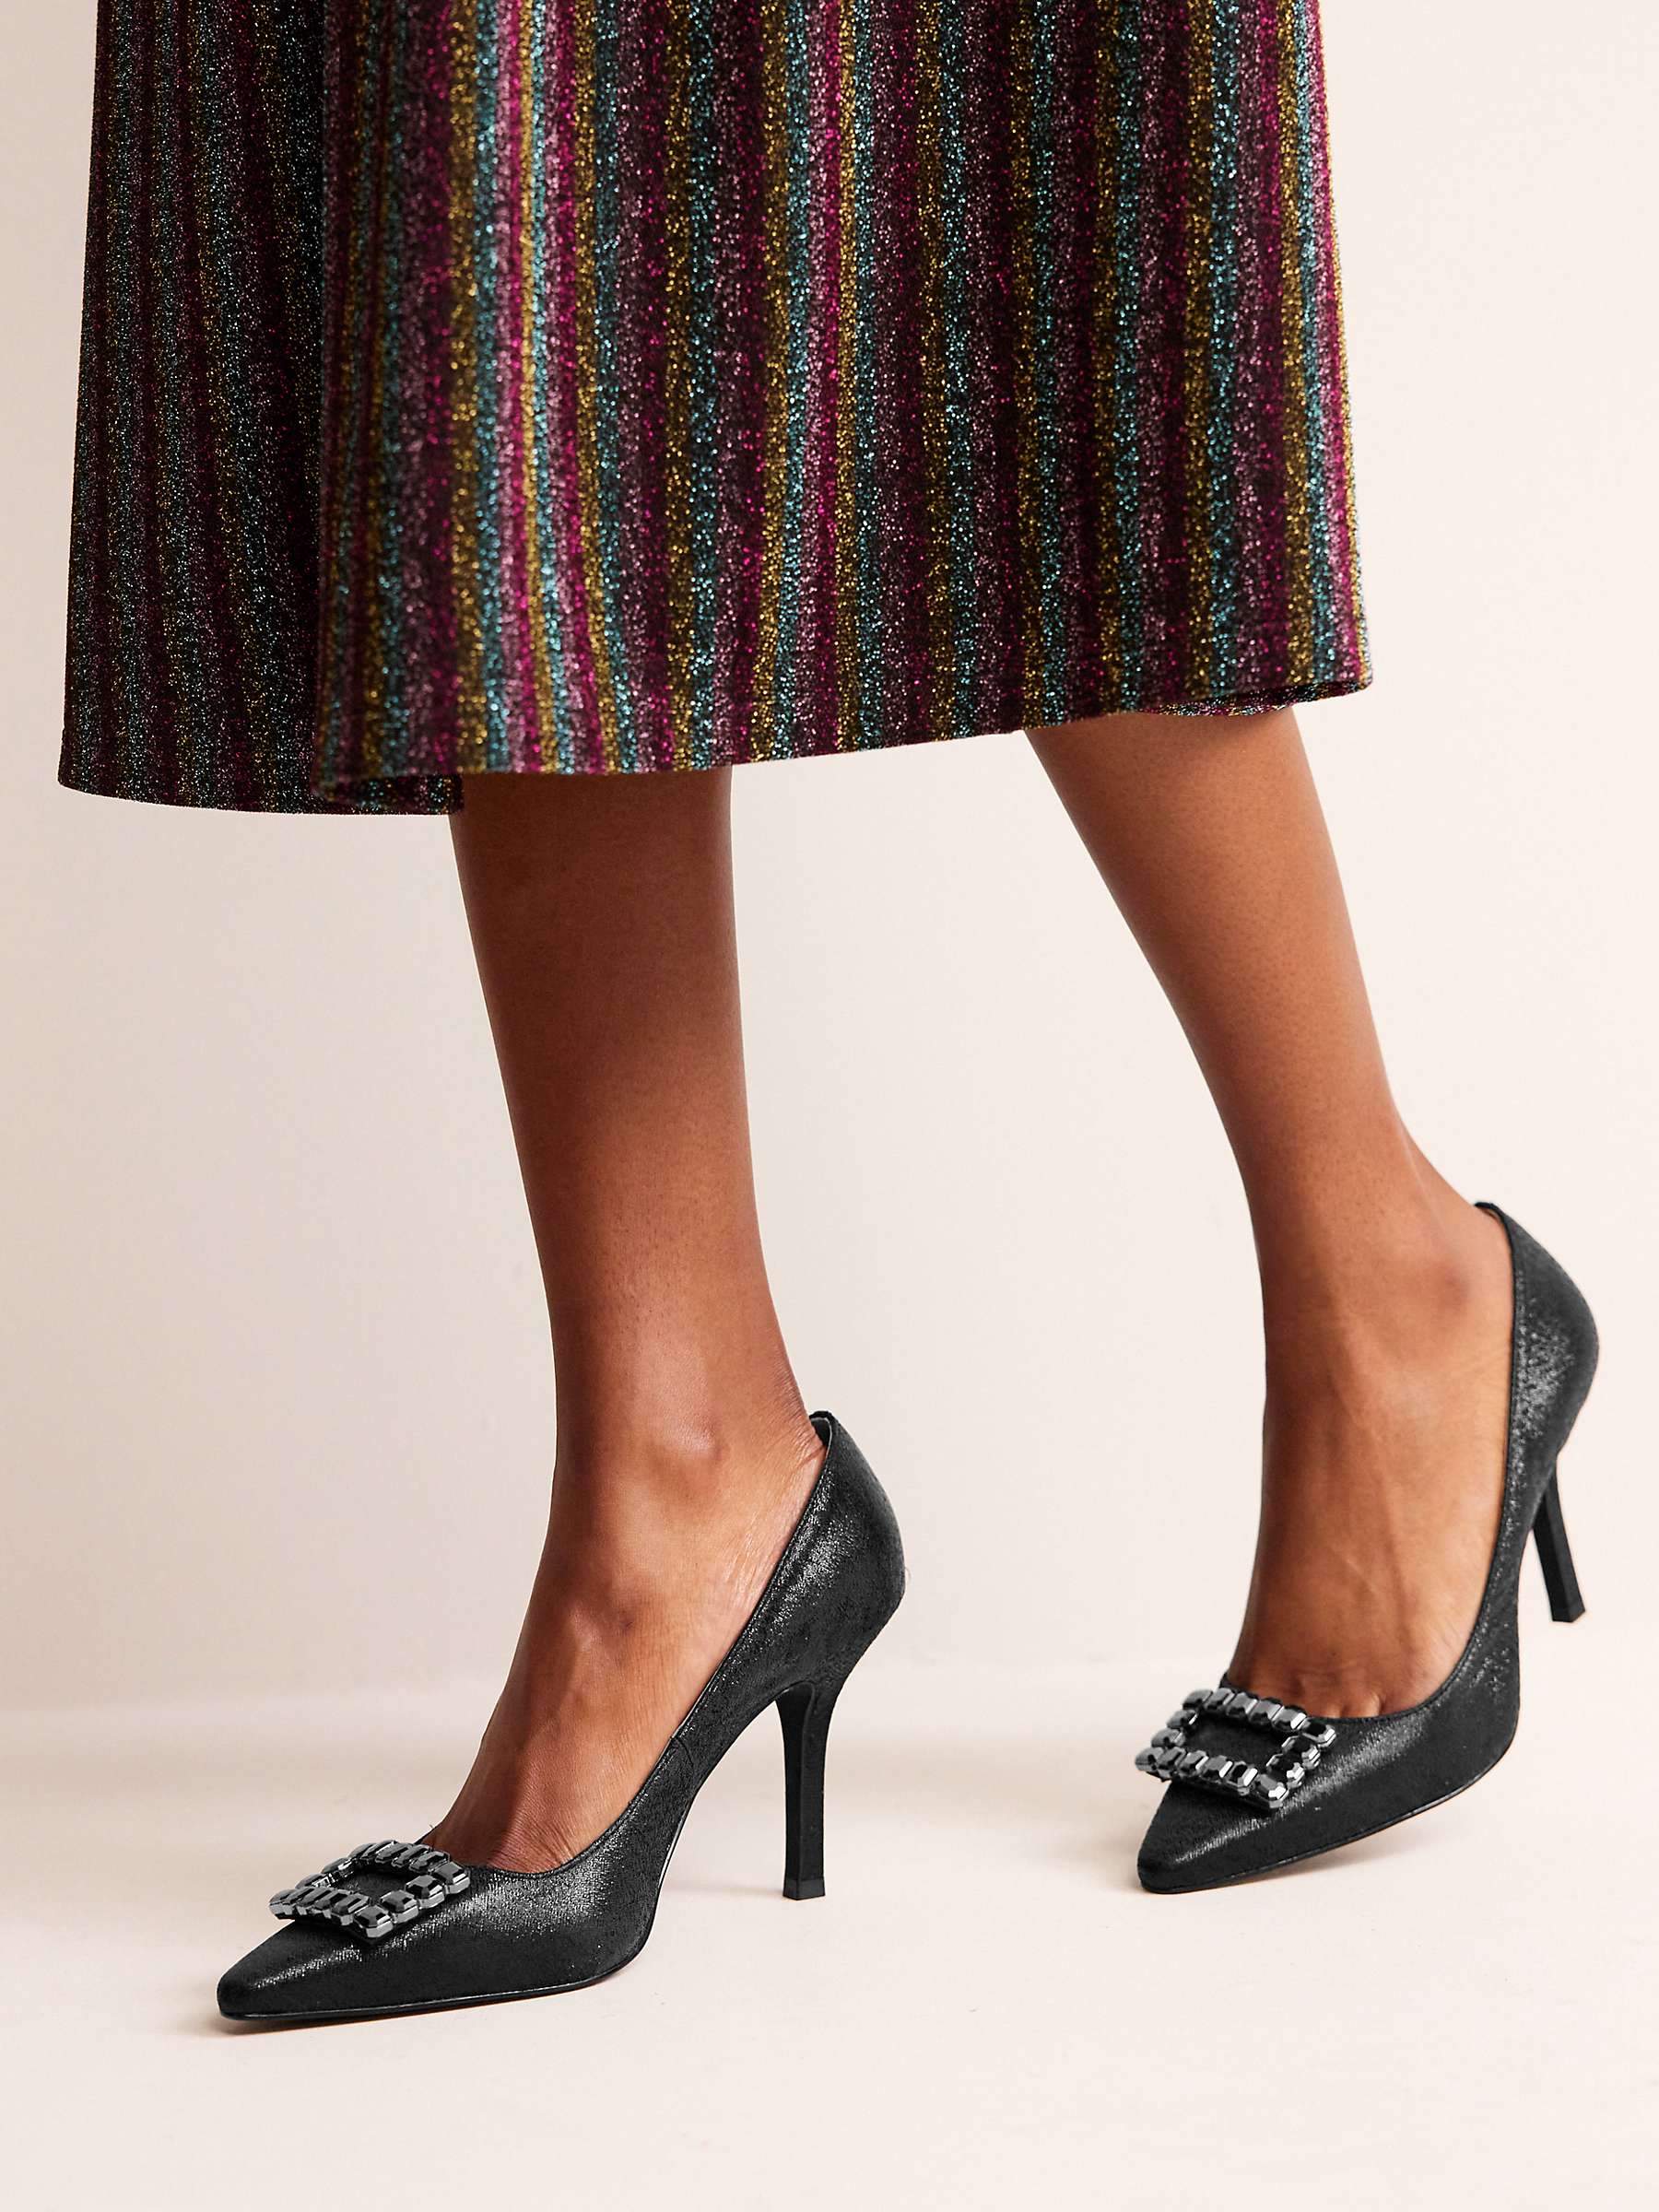 Boden Jewelled Heeled Court Shoes, Black Metallic at John Lewis & Partners